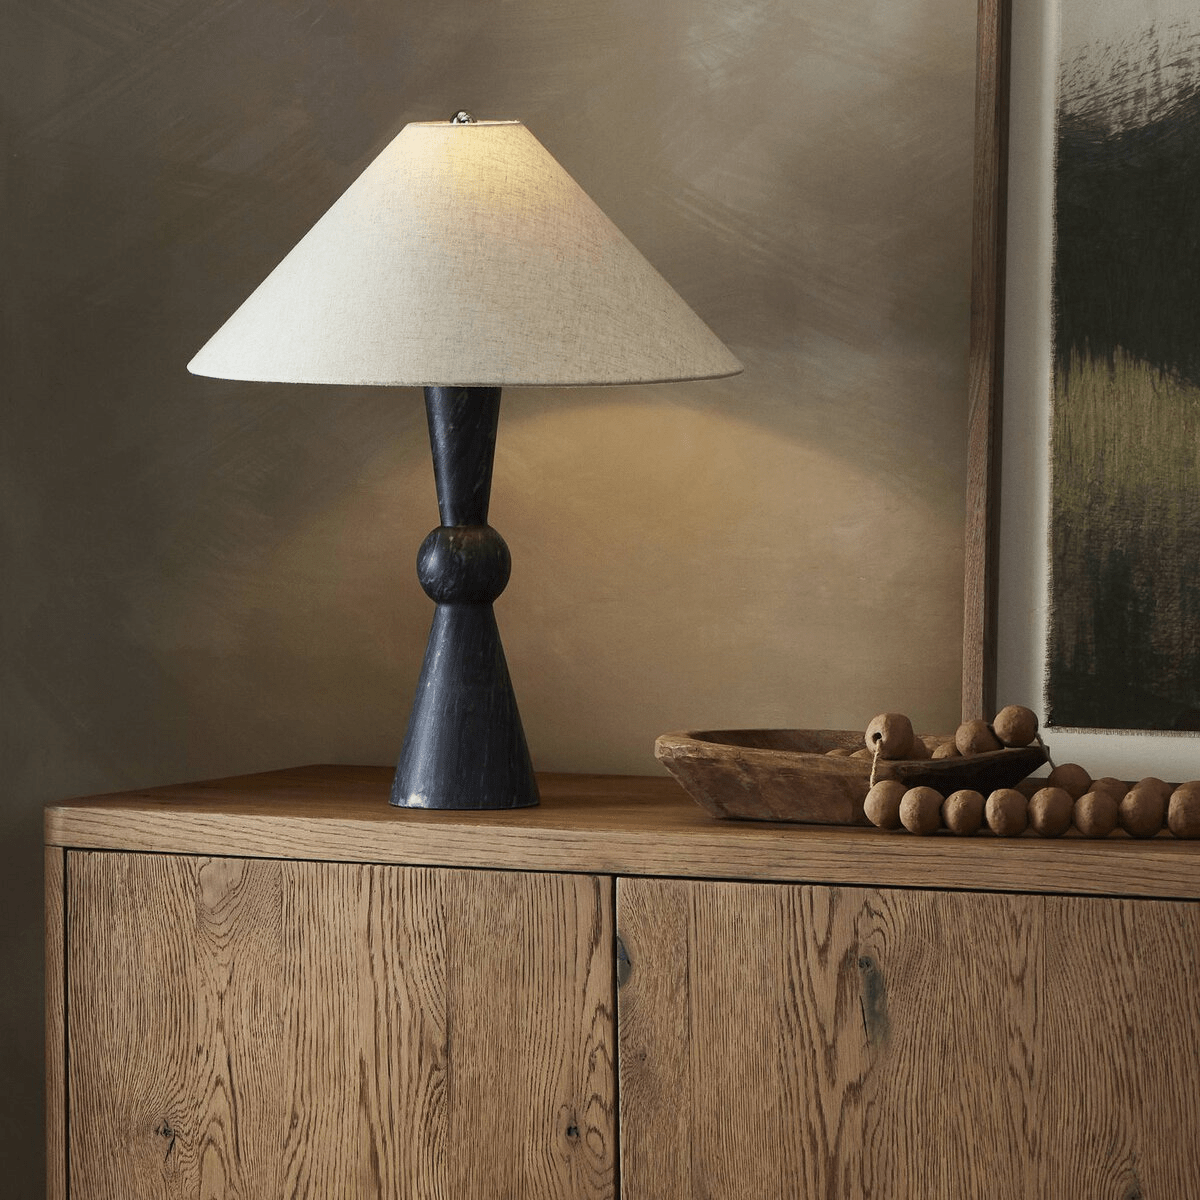 Bibianna Table Lamp Table Lamps 238196-002 801542232535